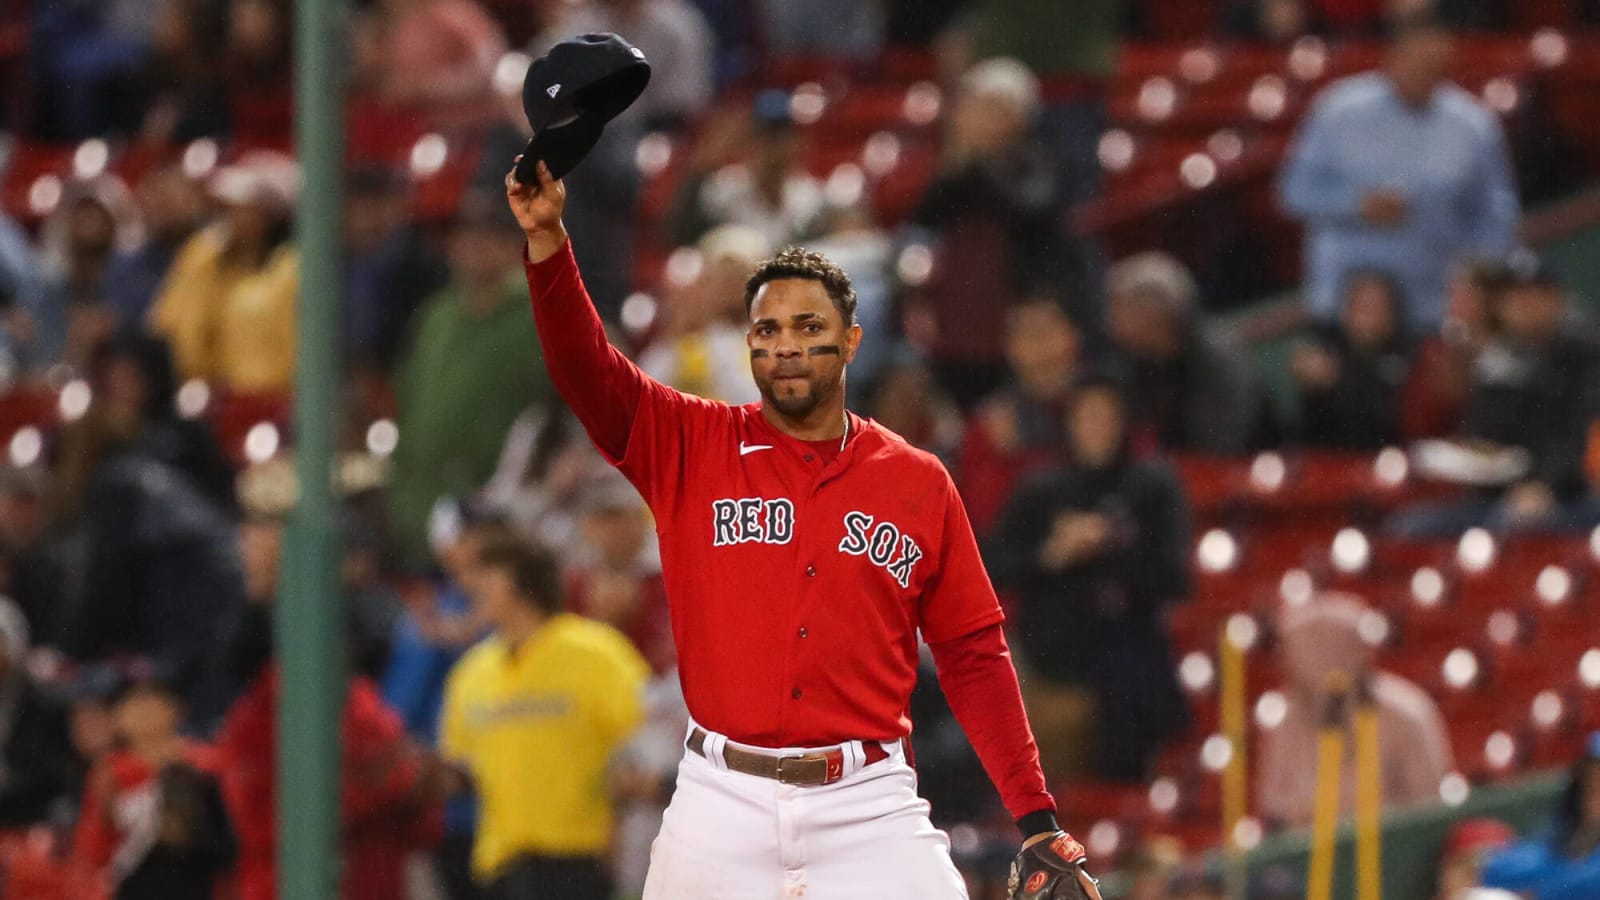 MLB Insider Reveals Red Sox Whiffed On Their Top Target